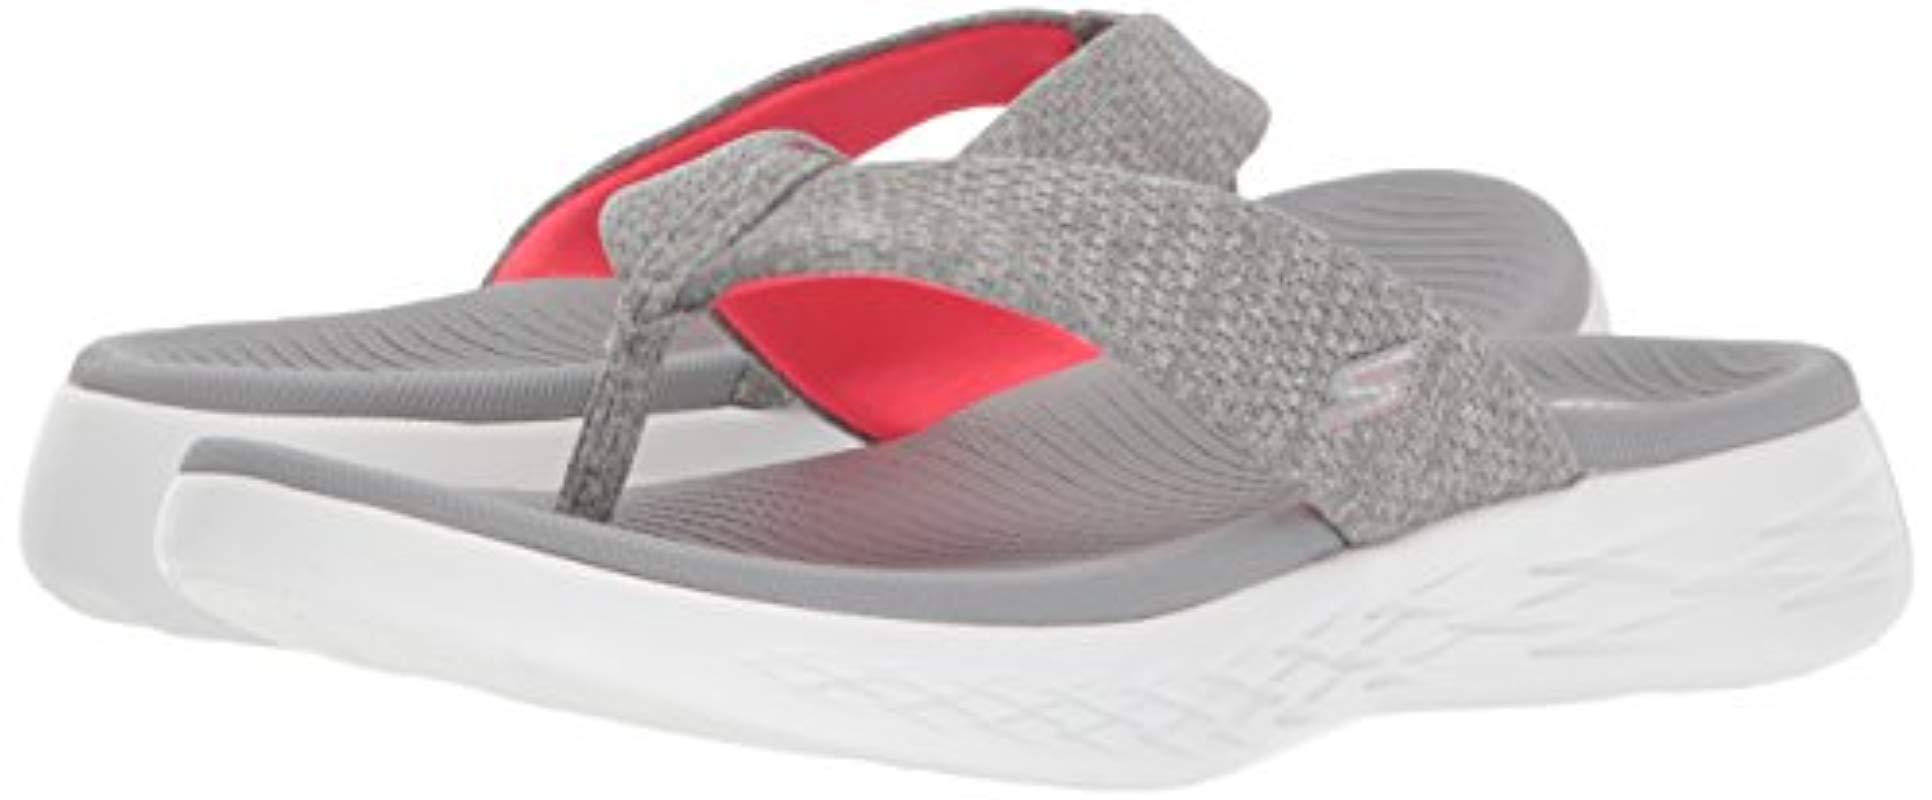 Skechers On-the-go 600-preferred Flip-flop in Gray/Pink (Gray) - Lyst